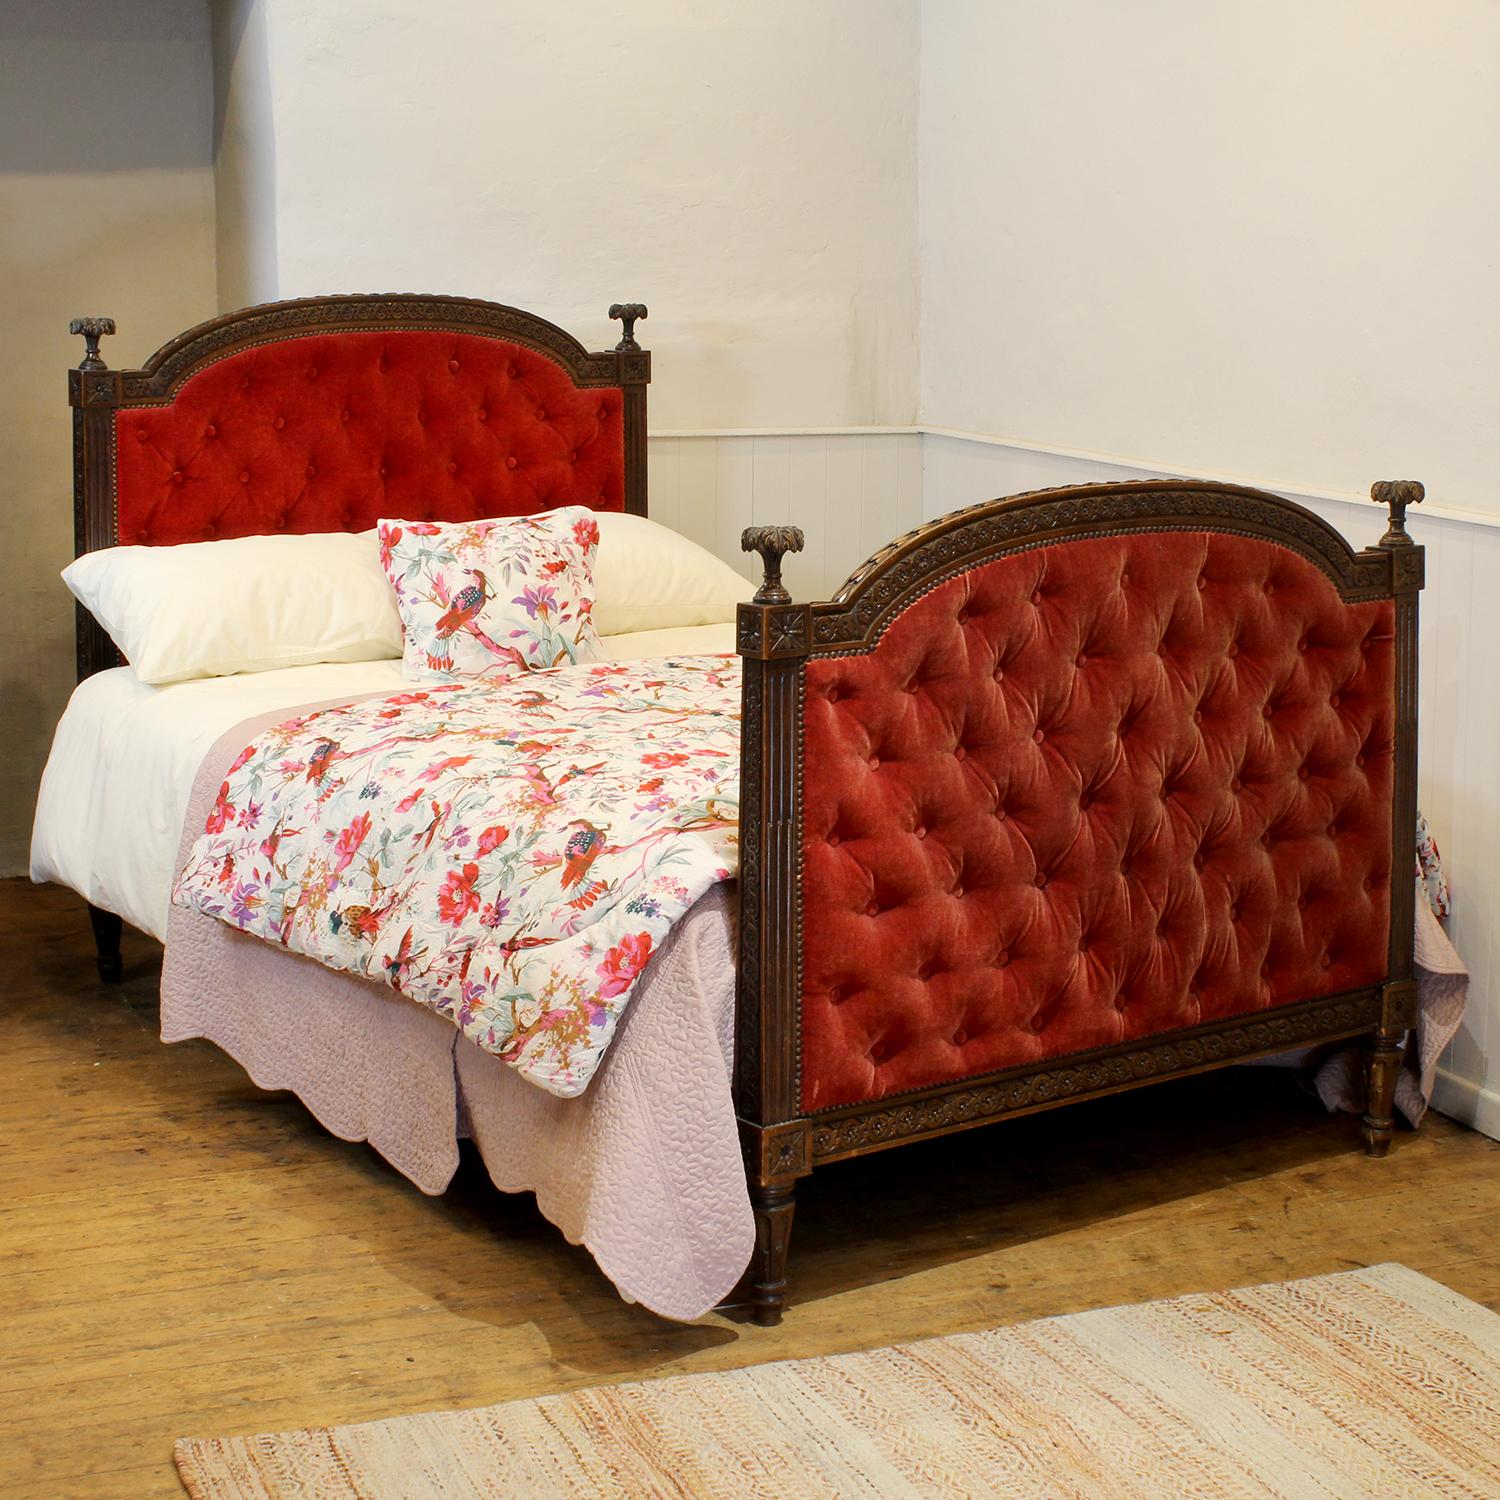 A Louis XVI style bed with an oak frame and button upholstered panels in red velvet.
The bed can be reupholstered in a fabric of your choice for an additional cost.

This bed accepts a standard double, 4ft 6in (54 in), base and mattress set, with